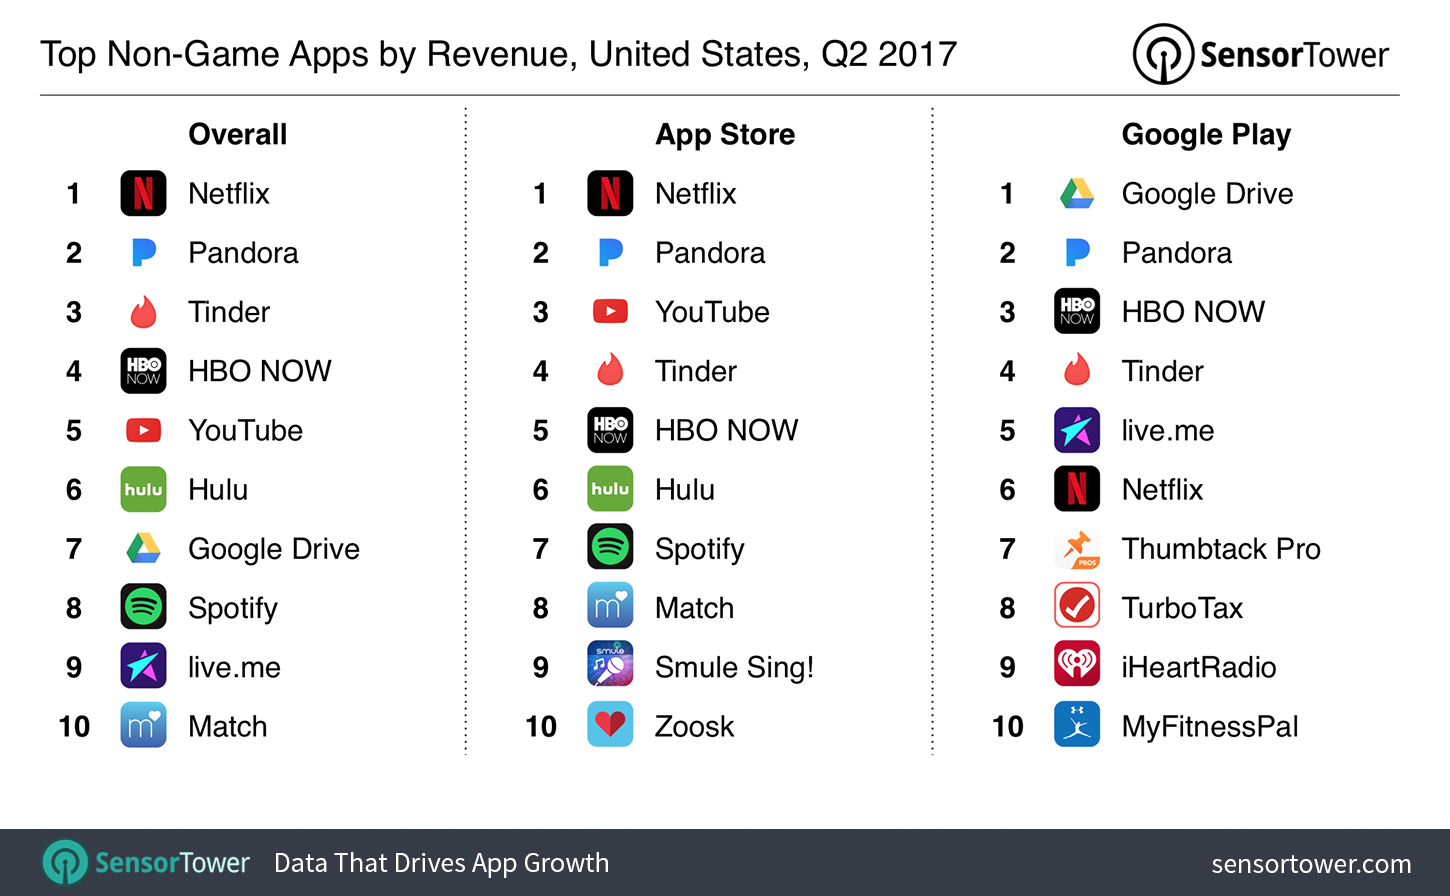 Q2 2017's Top Mobile Apps by United States Revenue